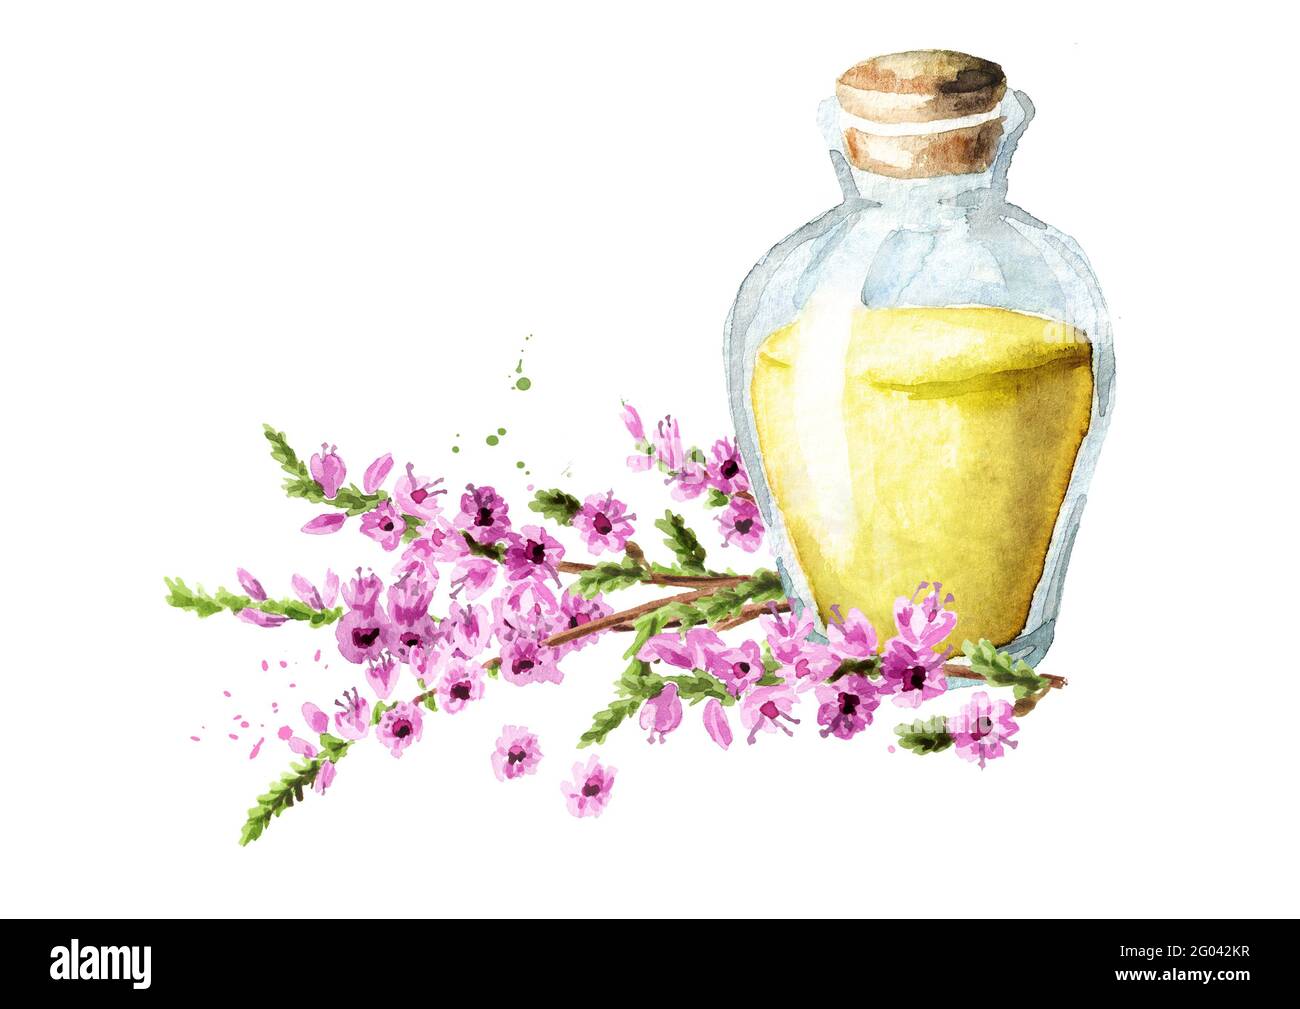 Tincture from Purple heather flowers, medical plant, herbs medicine. Watercolor hand drawn illustration isolated on white background Stock Photo